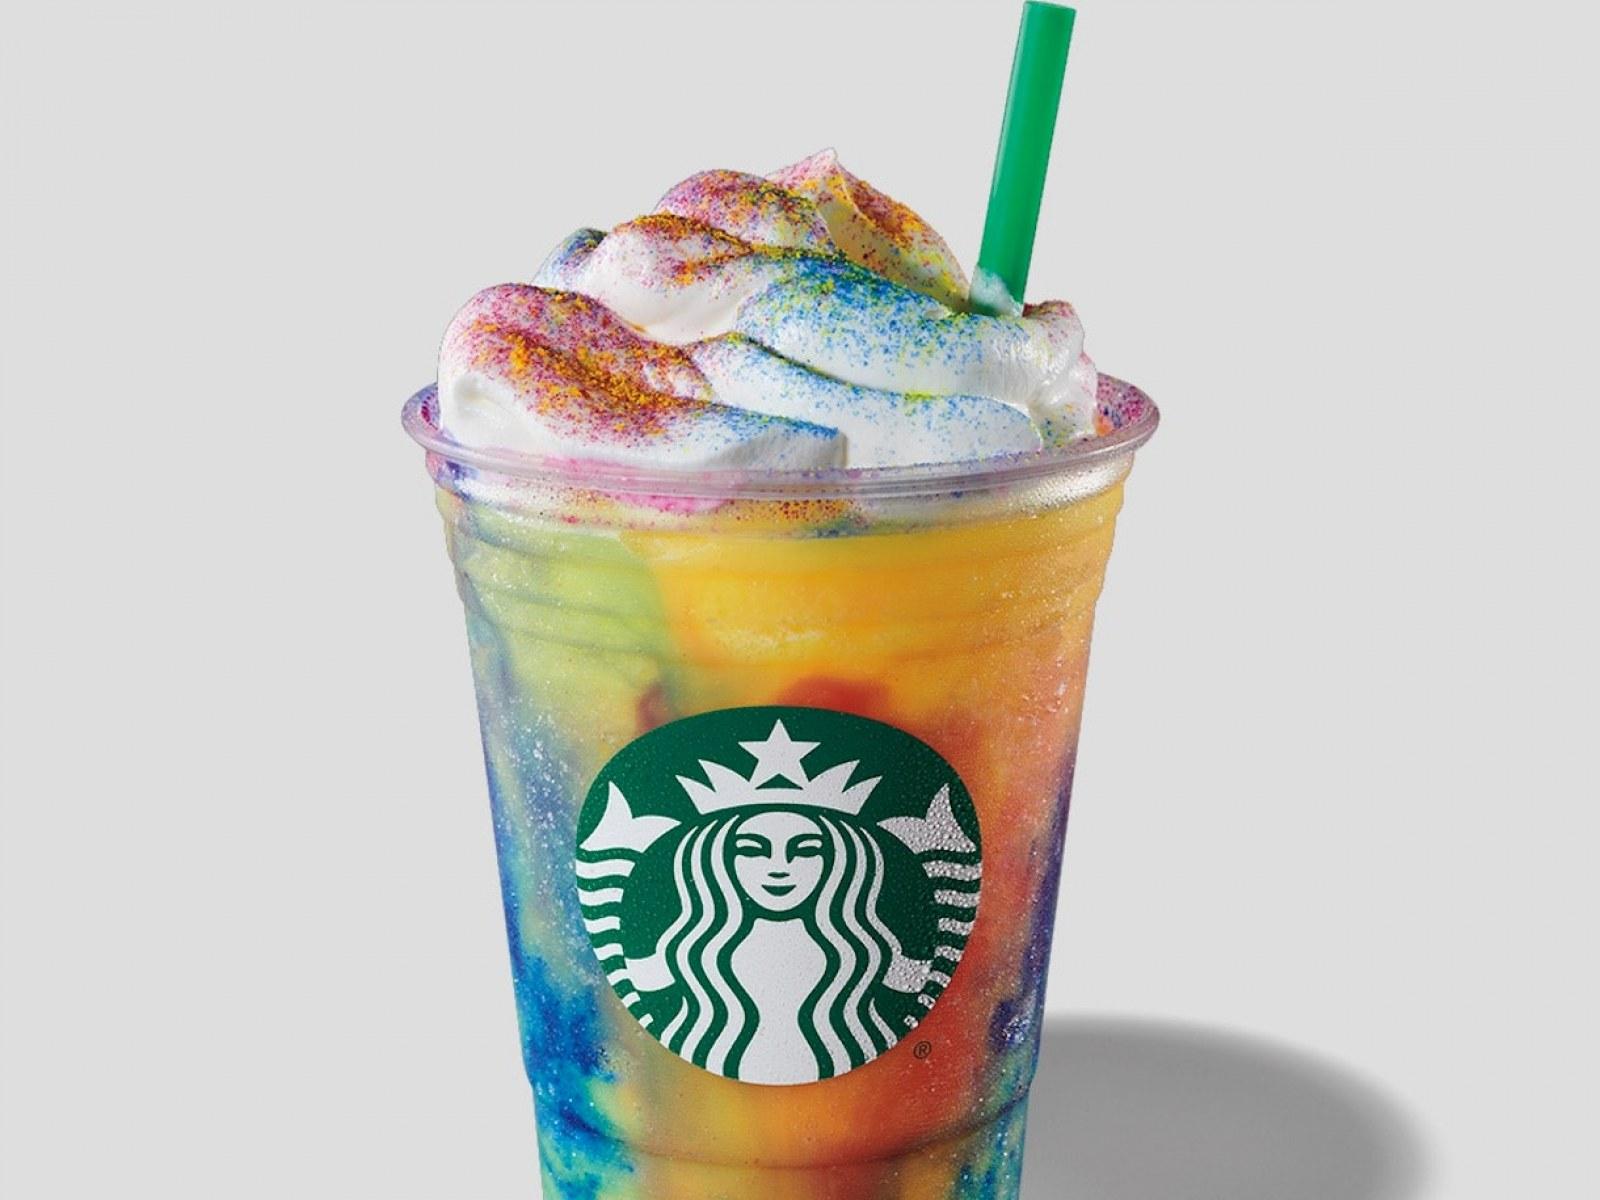 Starbucks' Tie Dye Frappuccino Has Arrived: Flavor, Ingredients and More